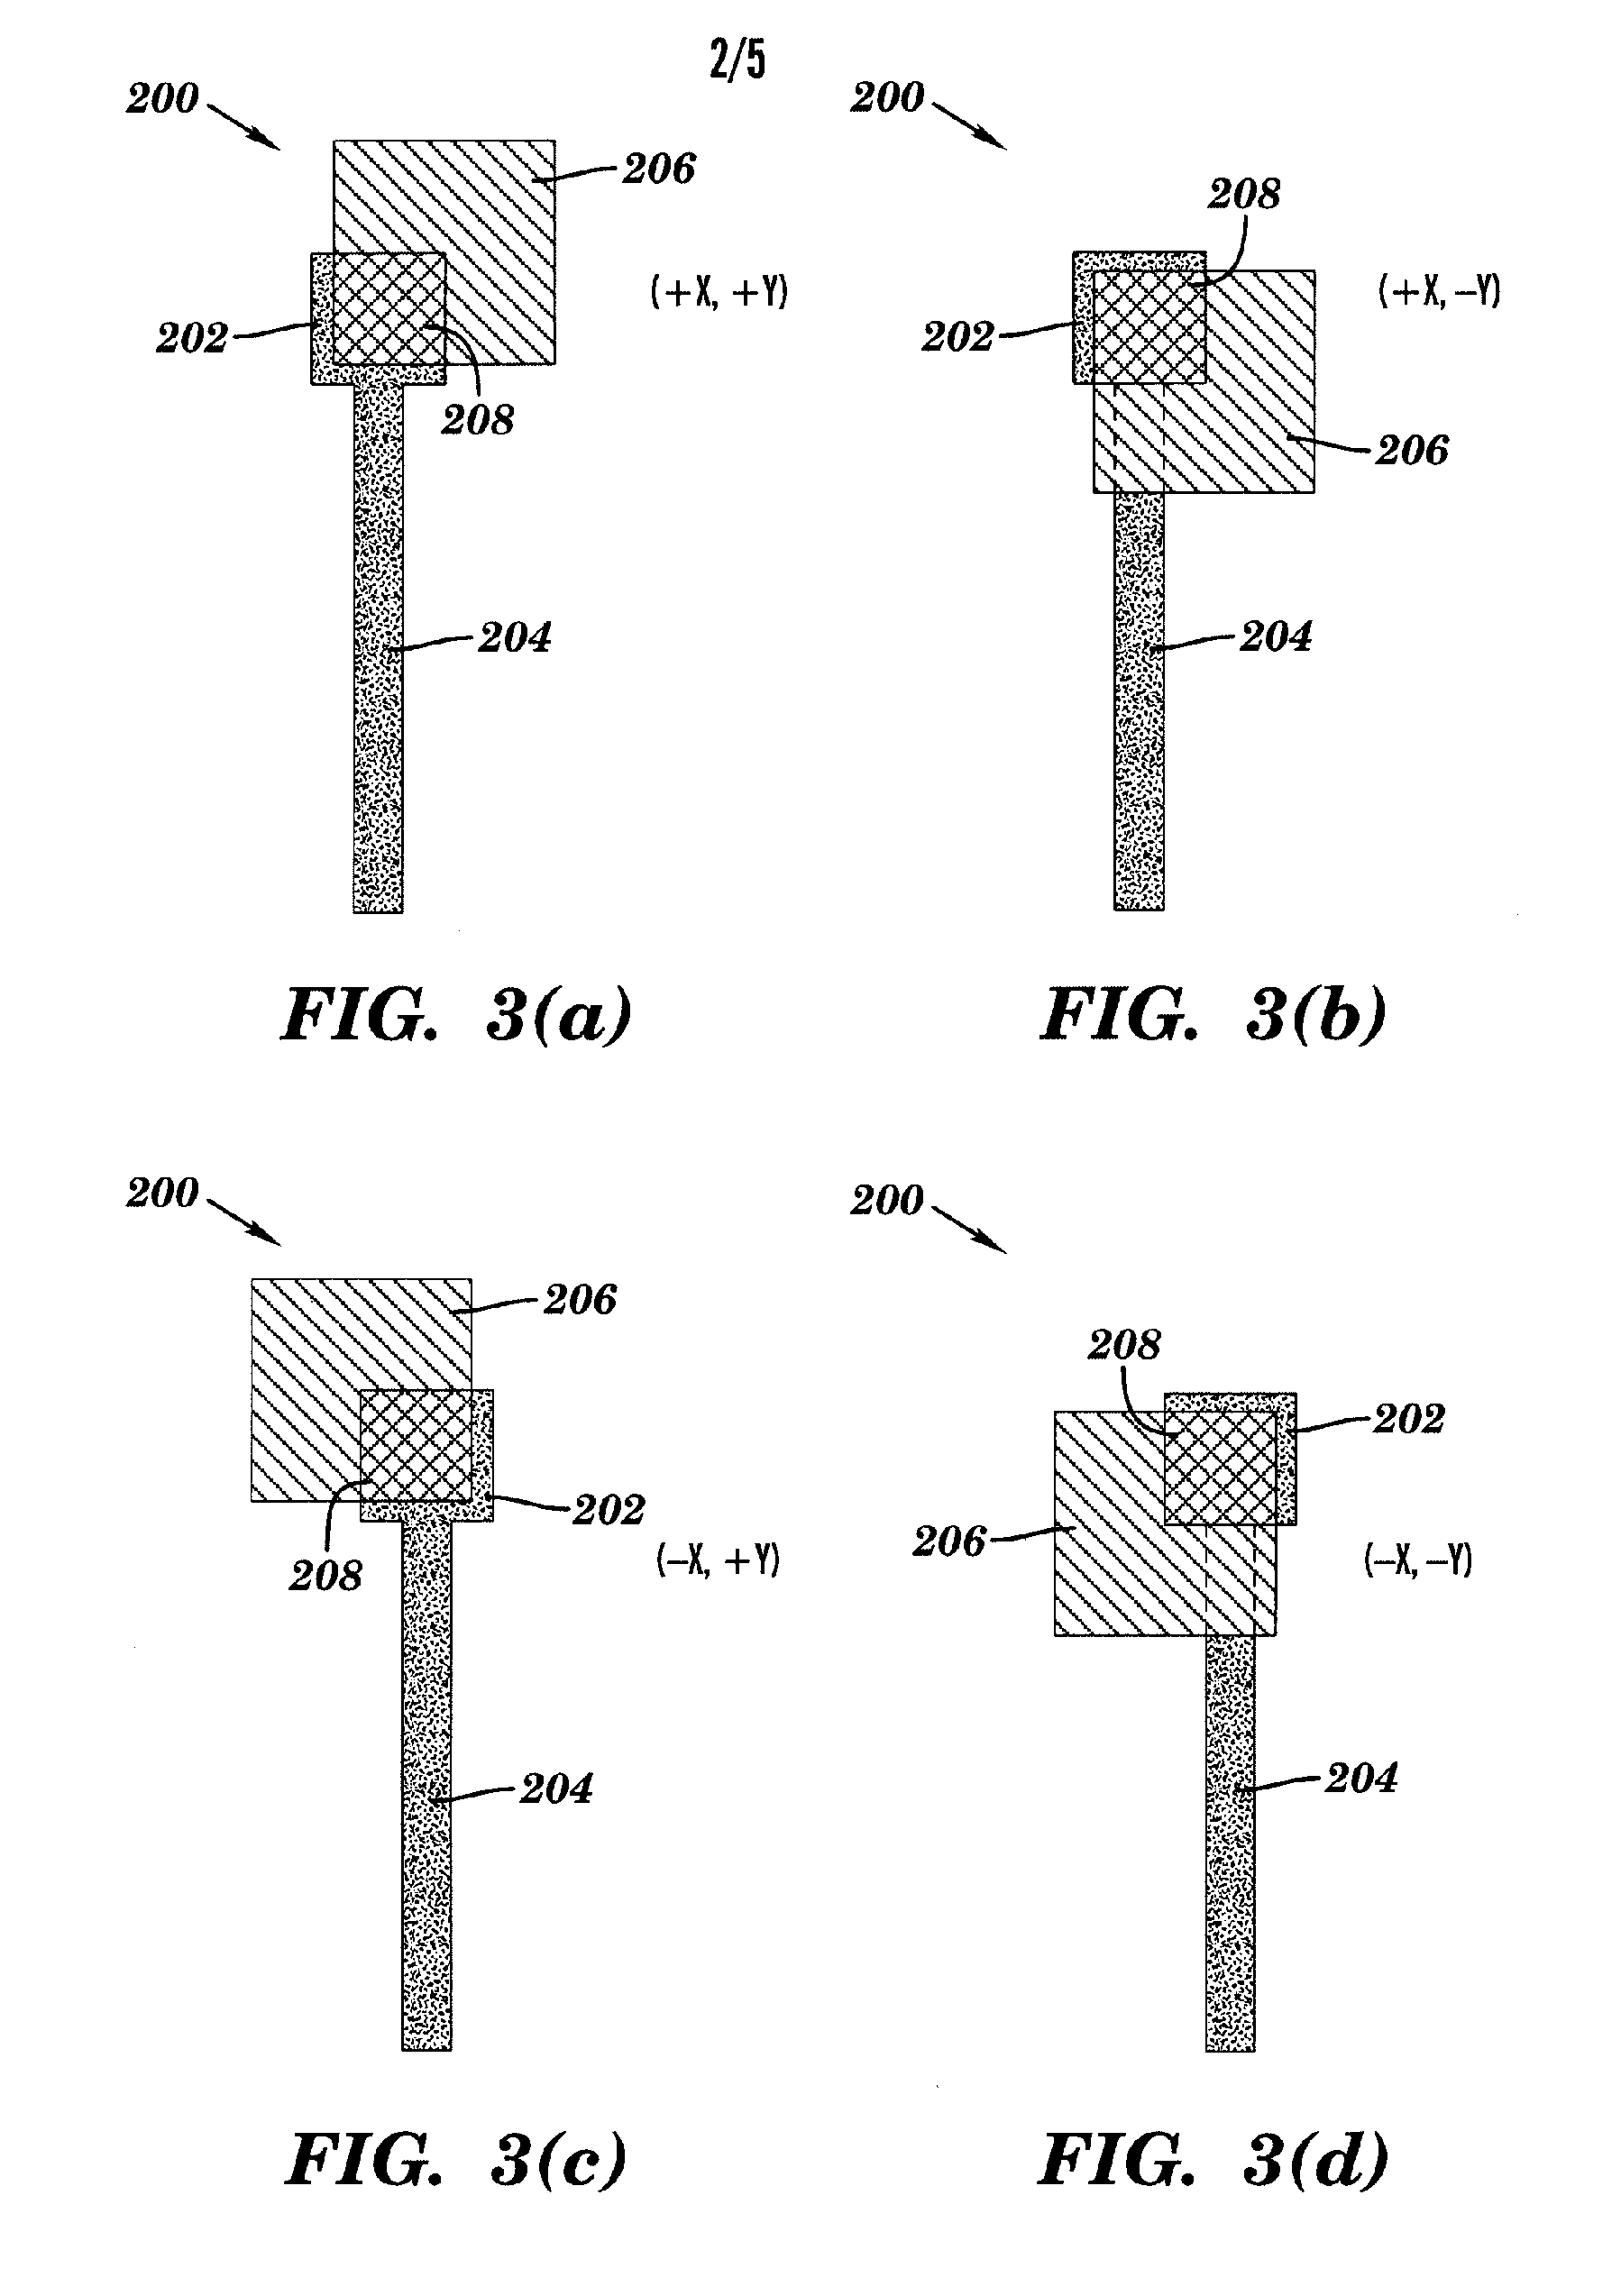 Method for verification of resolution enhancement techniques and optical proximity correction in lithography